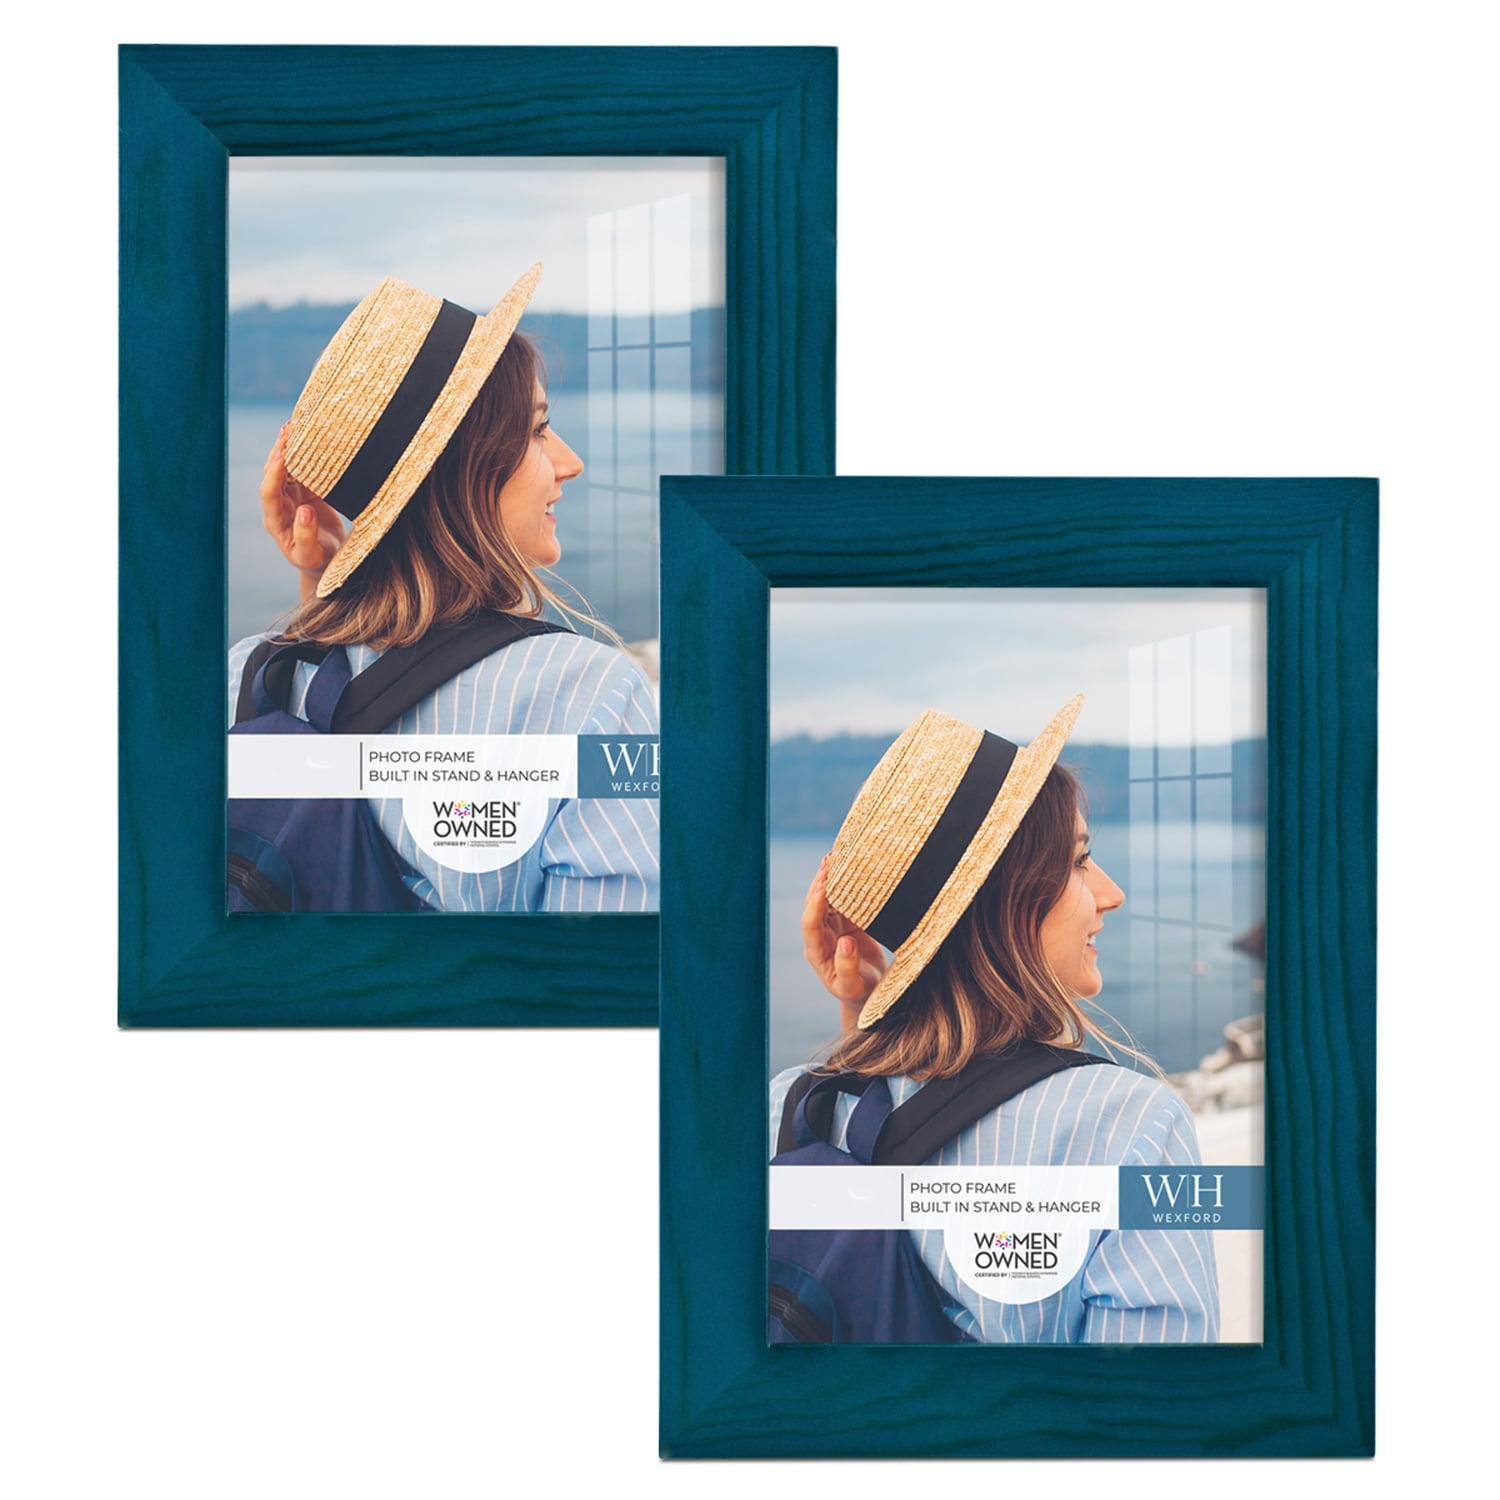 BarnwoodUSA 4 in. x 6 in. Robins Egg Blue Rustic Farmhouse Reclaimed  Picture Frame with 1.5 in. Molding 4x6 2 blue - The Home Depot